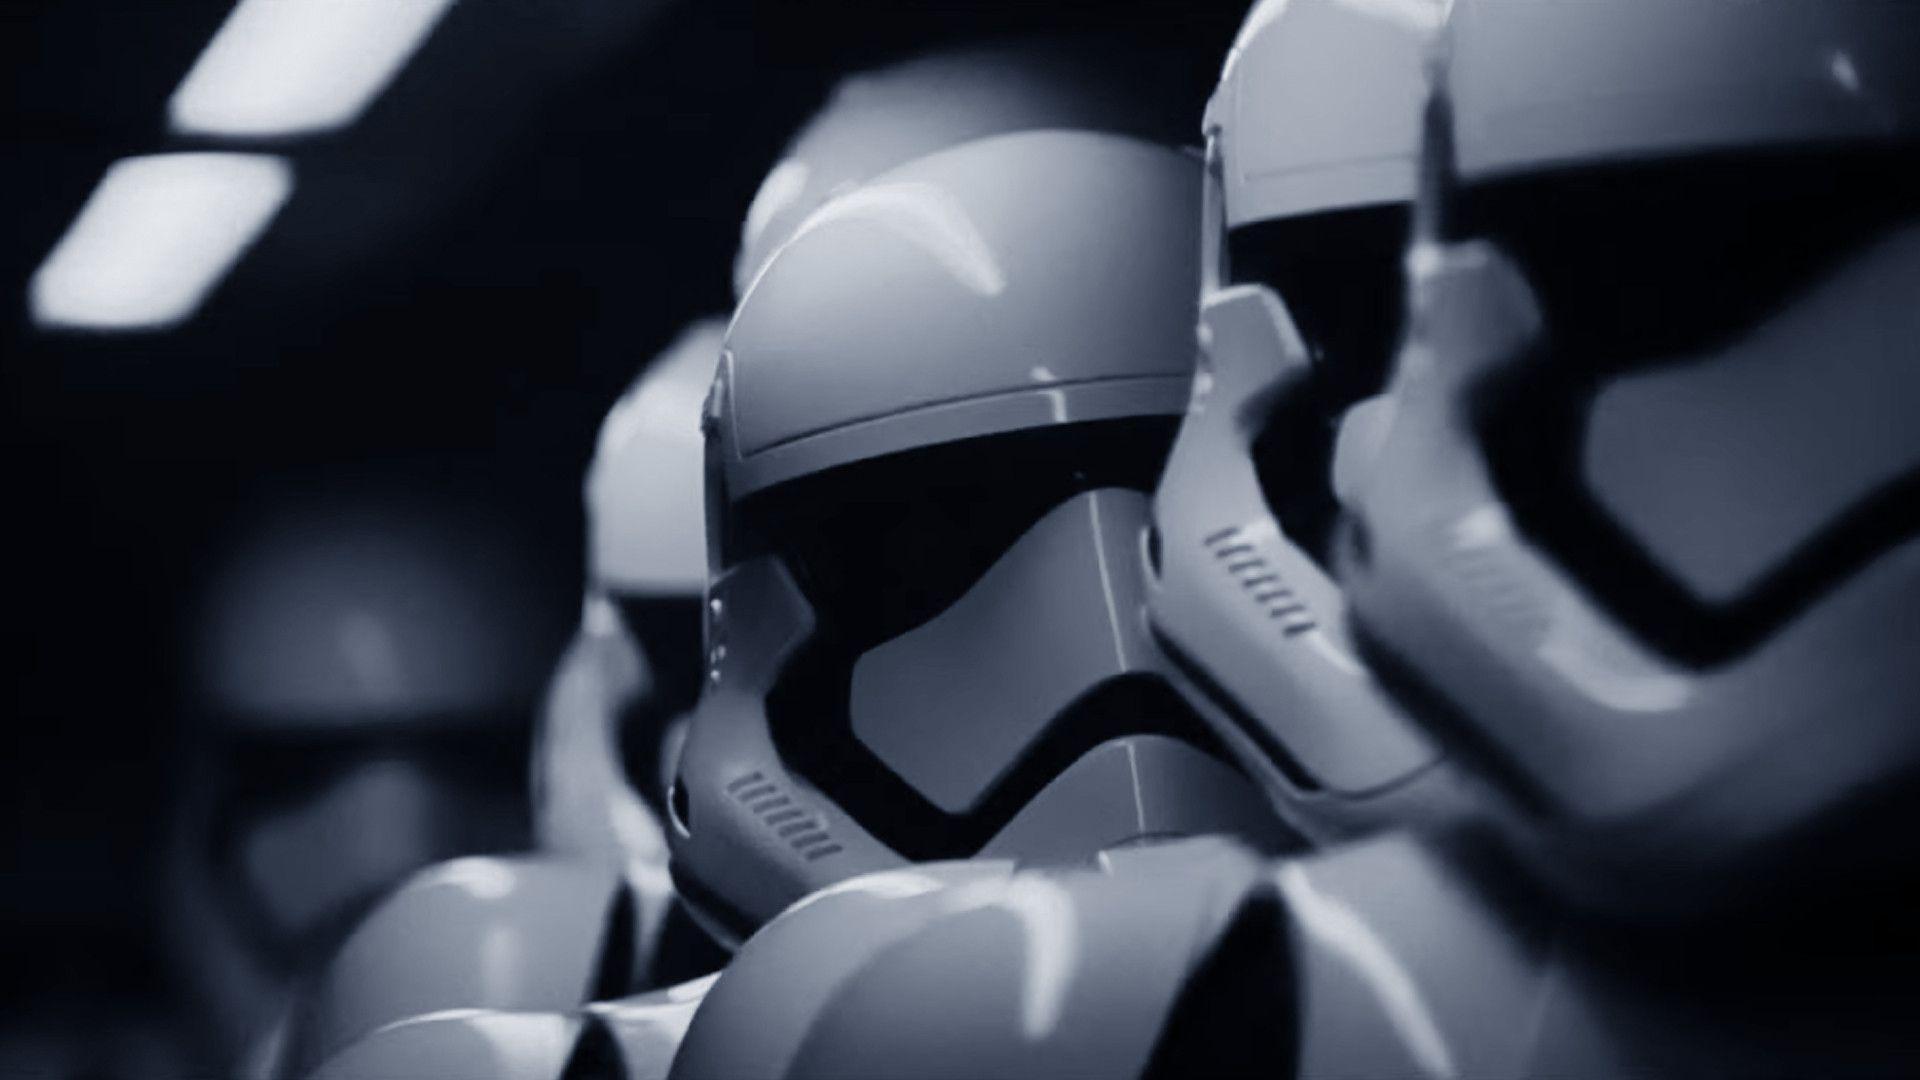 The Force Awakens Stormtroopers Wallpaper by HD Wallpaper Daily